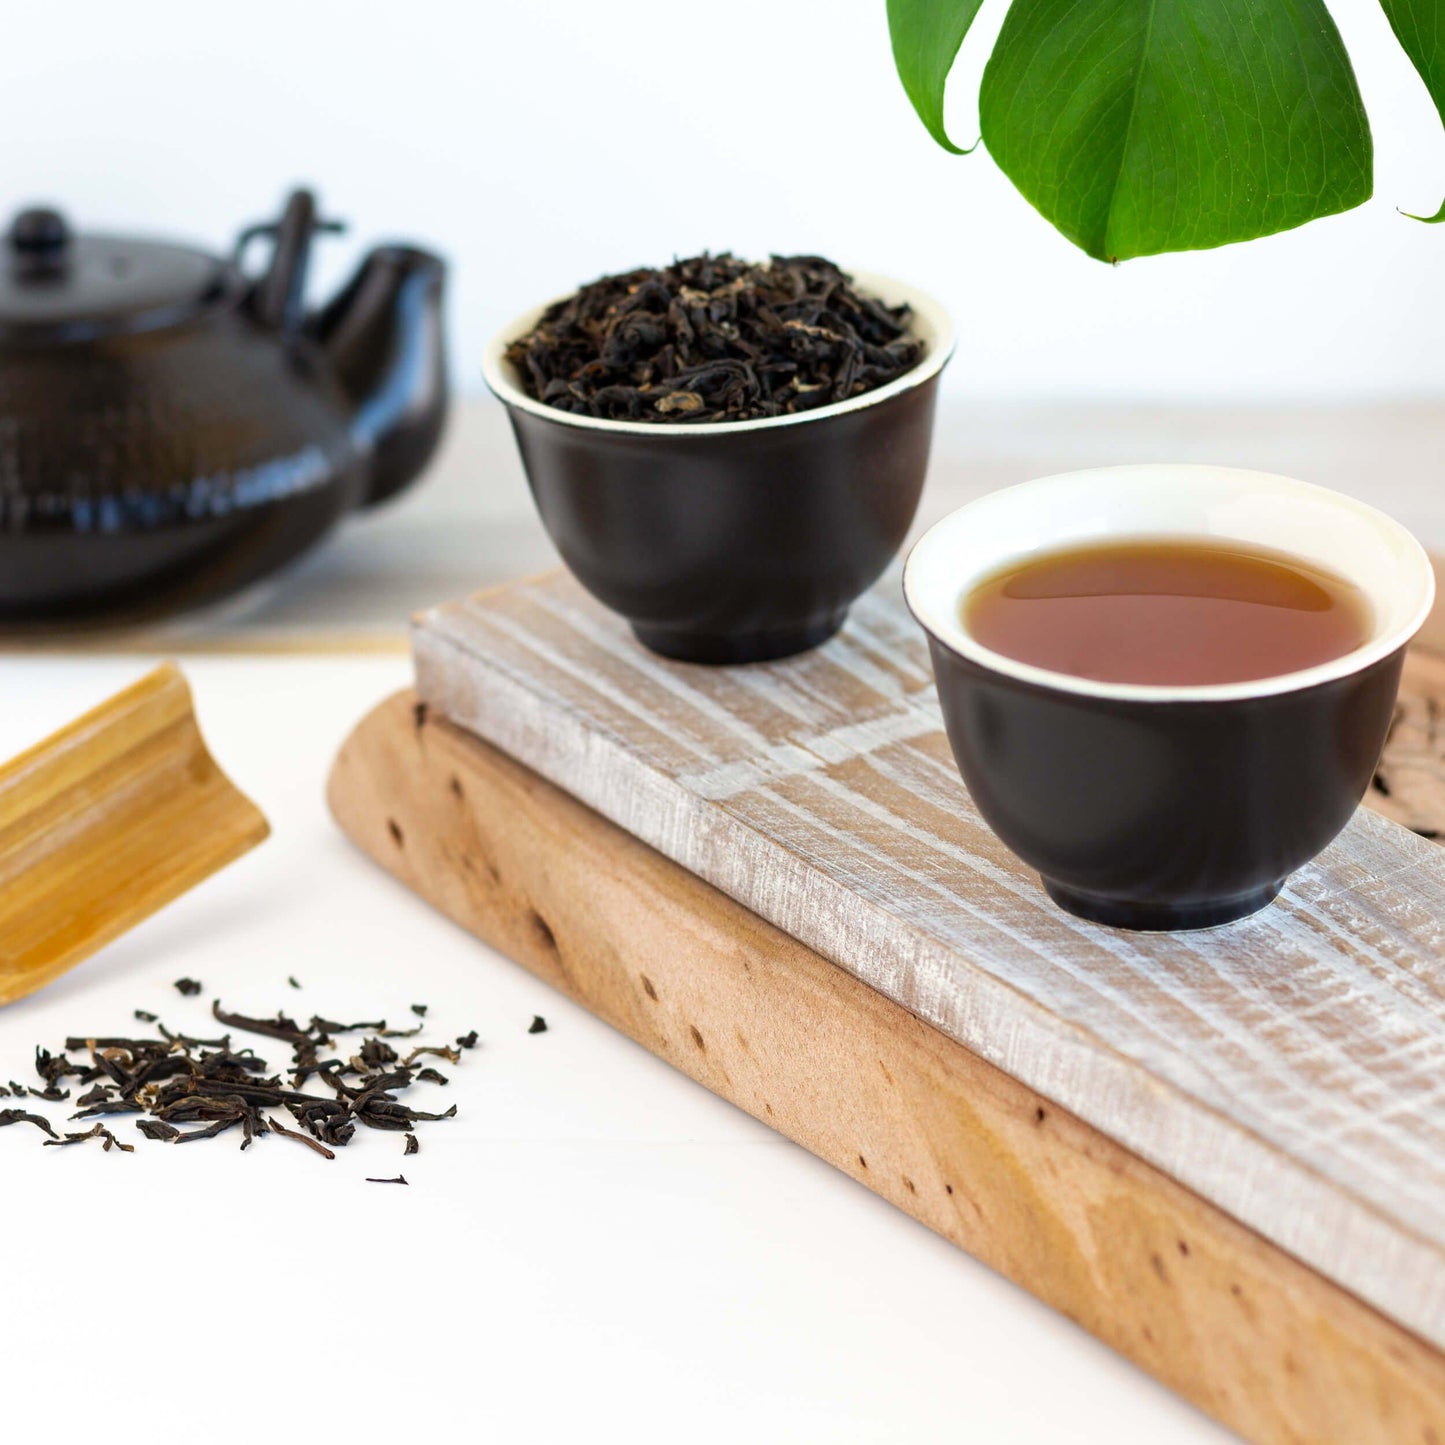 Vietnamese Golden Tips Organic Black Tea shown as brewed tea in a small black teacup next to another teacup filled with loose tea leaves. A black teapot is in the background and loose tea leaves are in the foreground